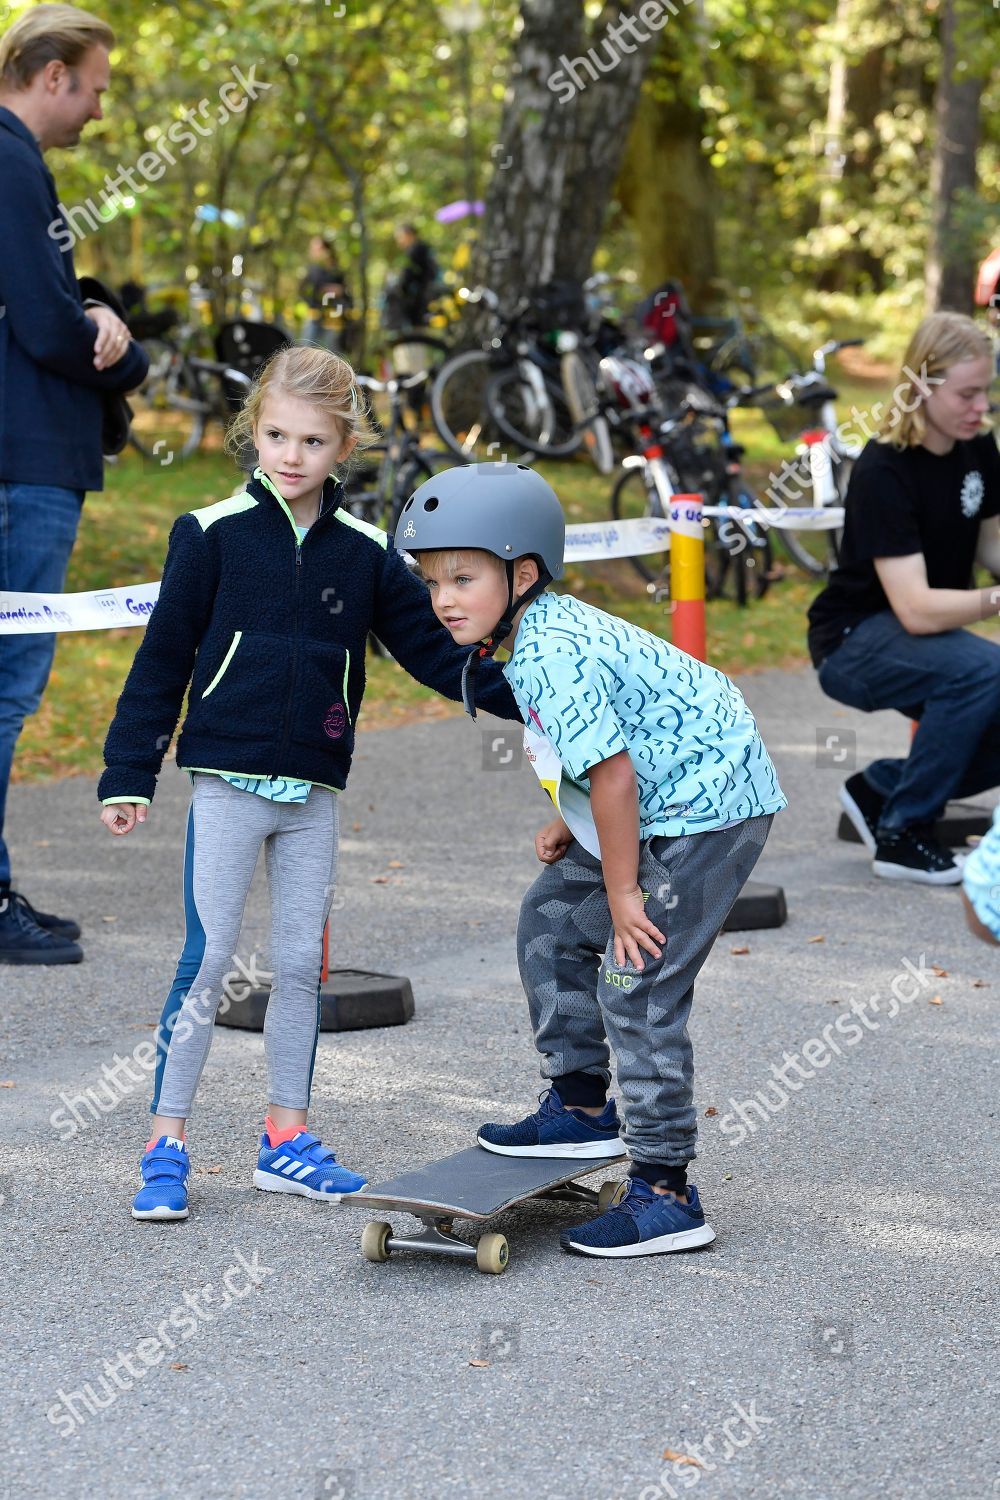 race-and-pep-day-stockholm-sweden-shutterstock-editorial-9884341al.jpg